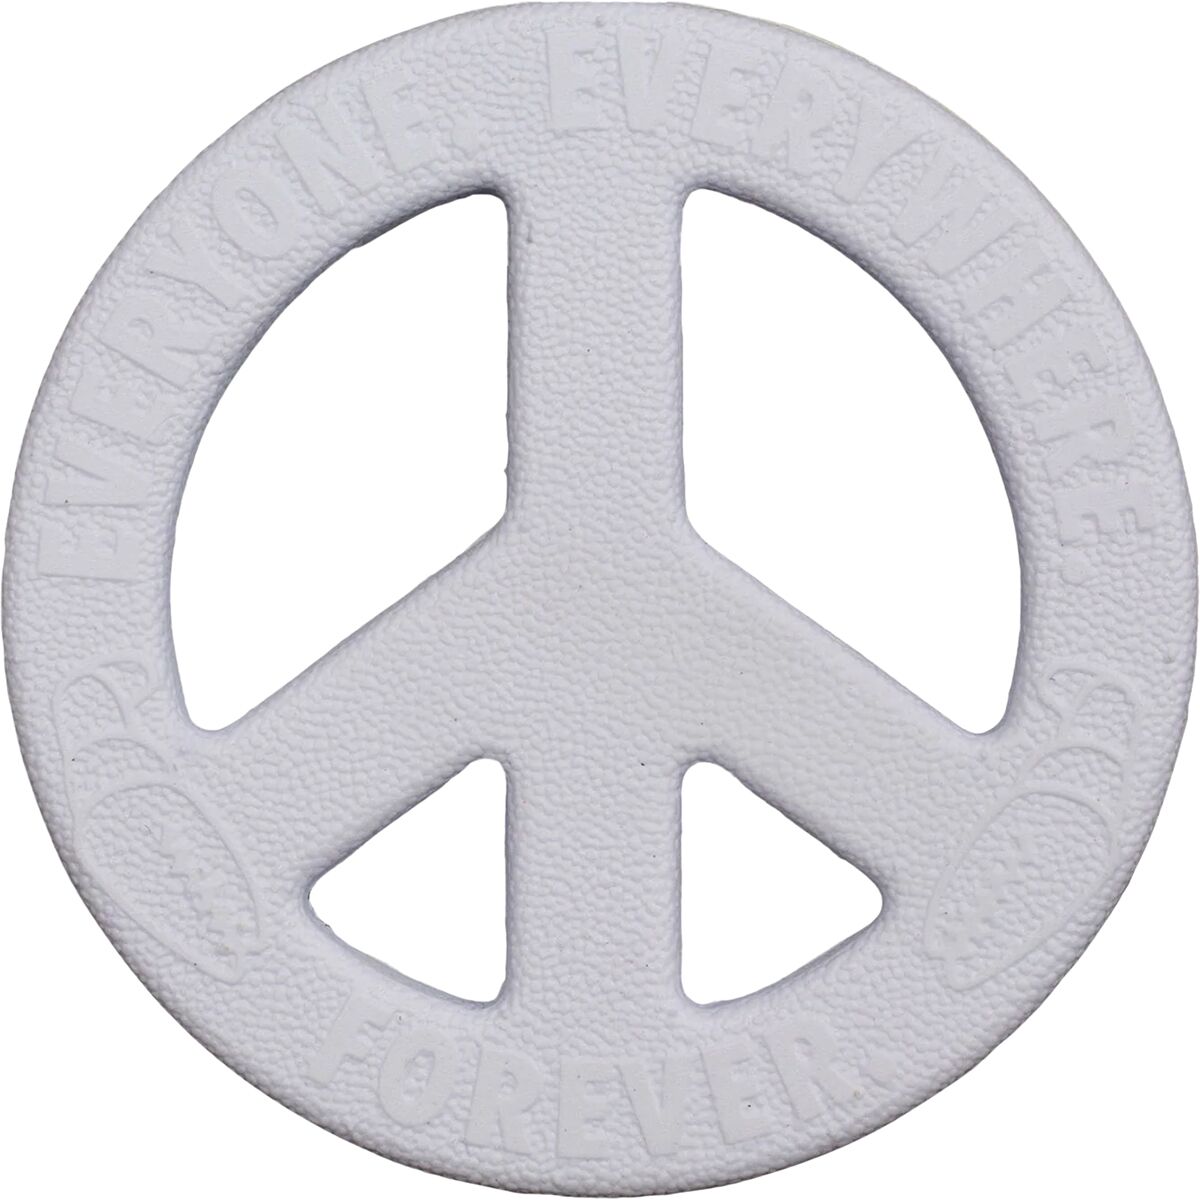 Crab Grab Peace of Foam Traction Pad White